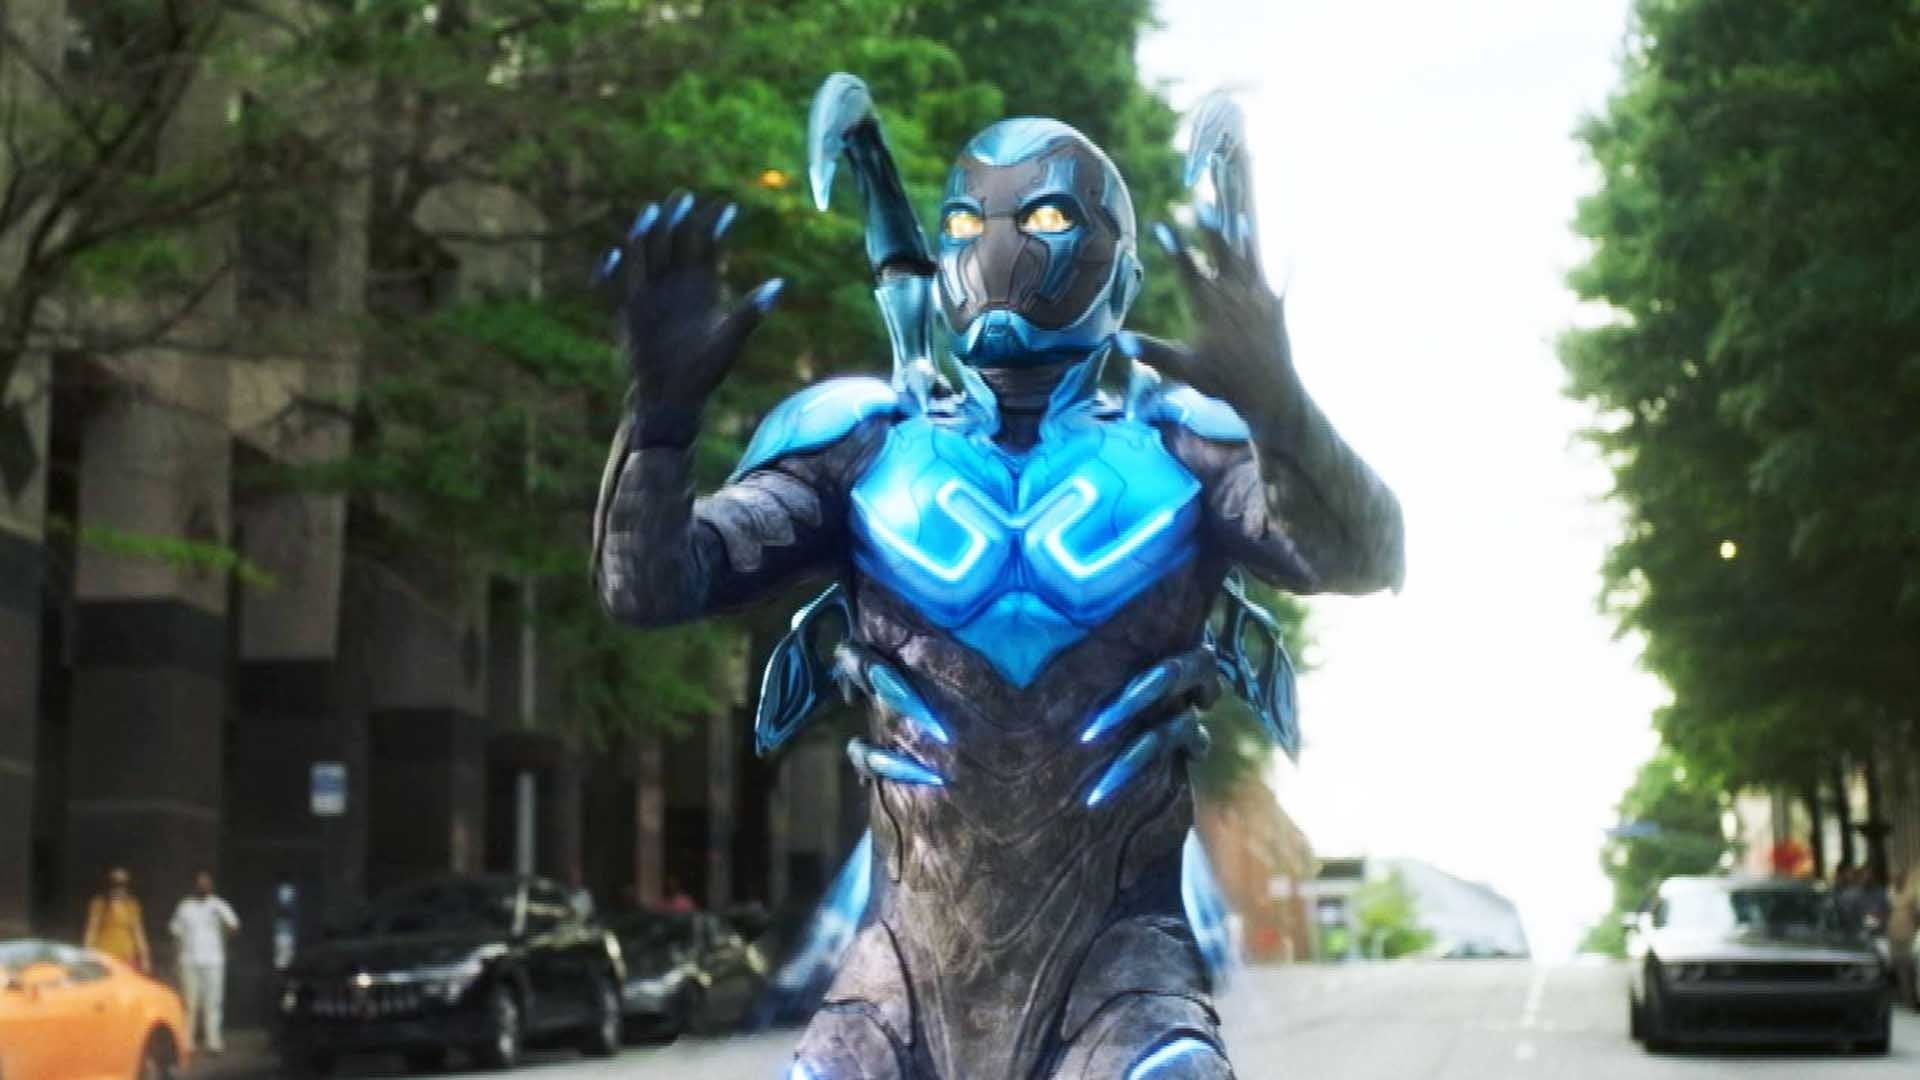 How to watch Blue Beetle 2023 outside the US on Max - UpNext by